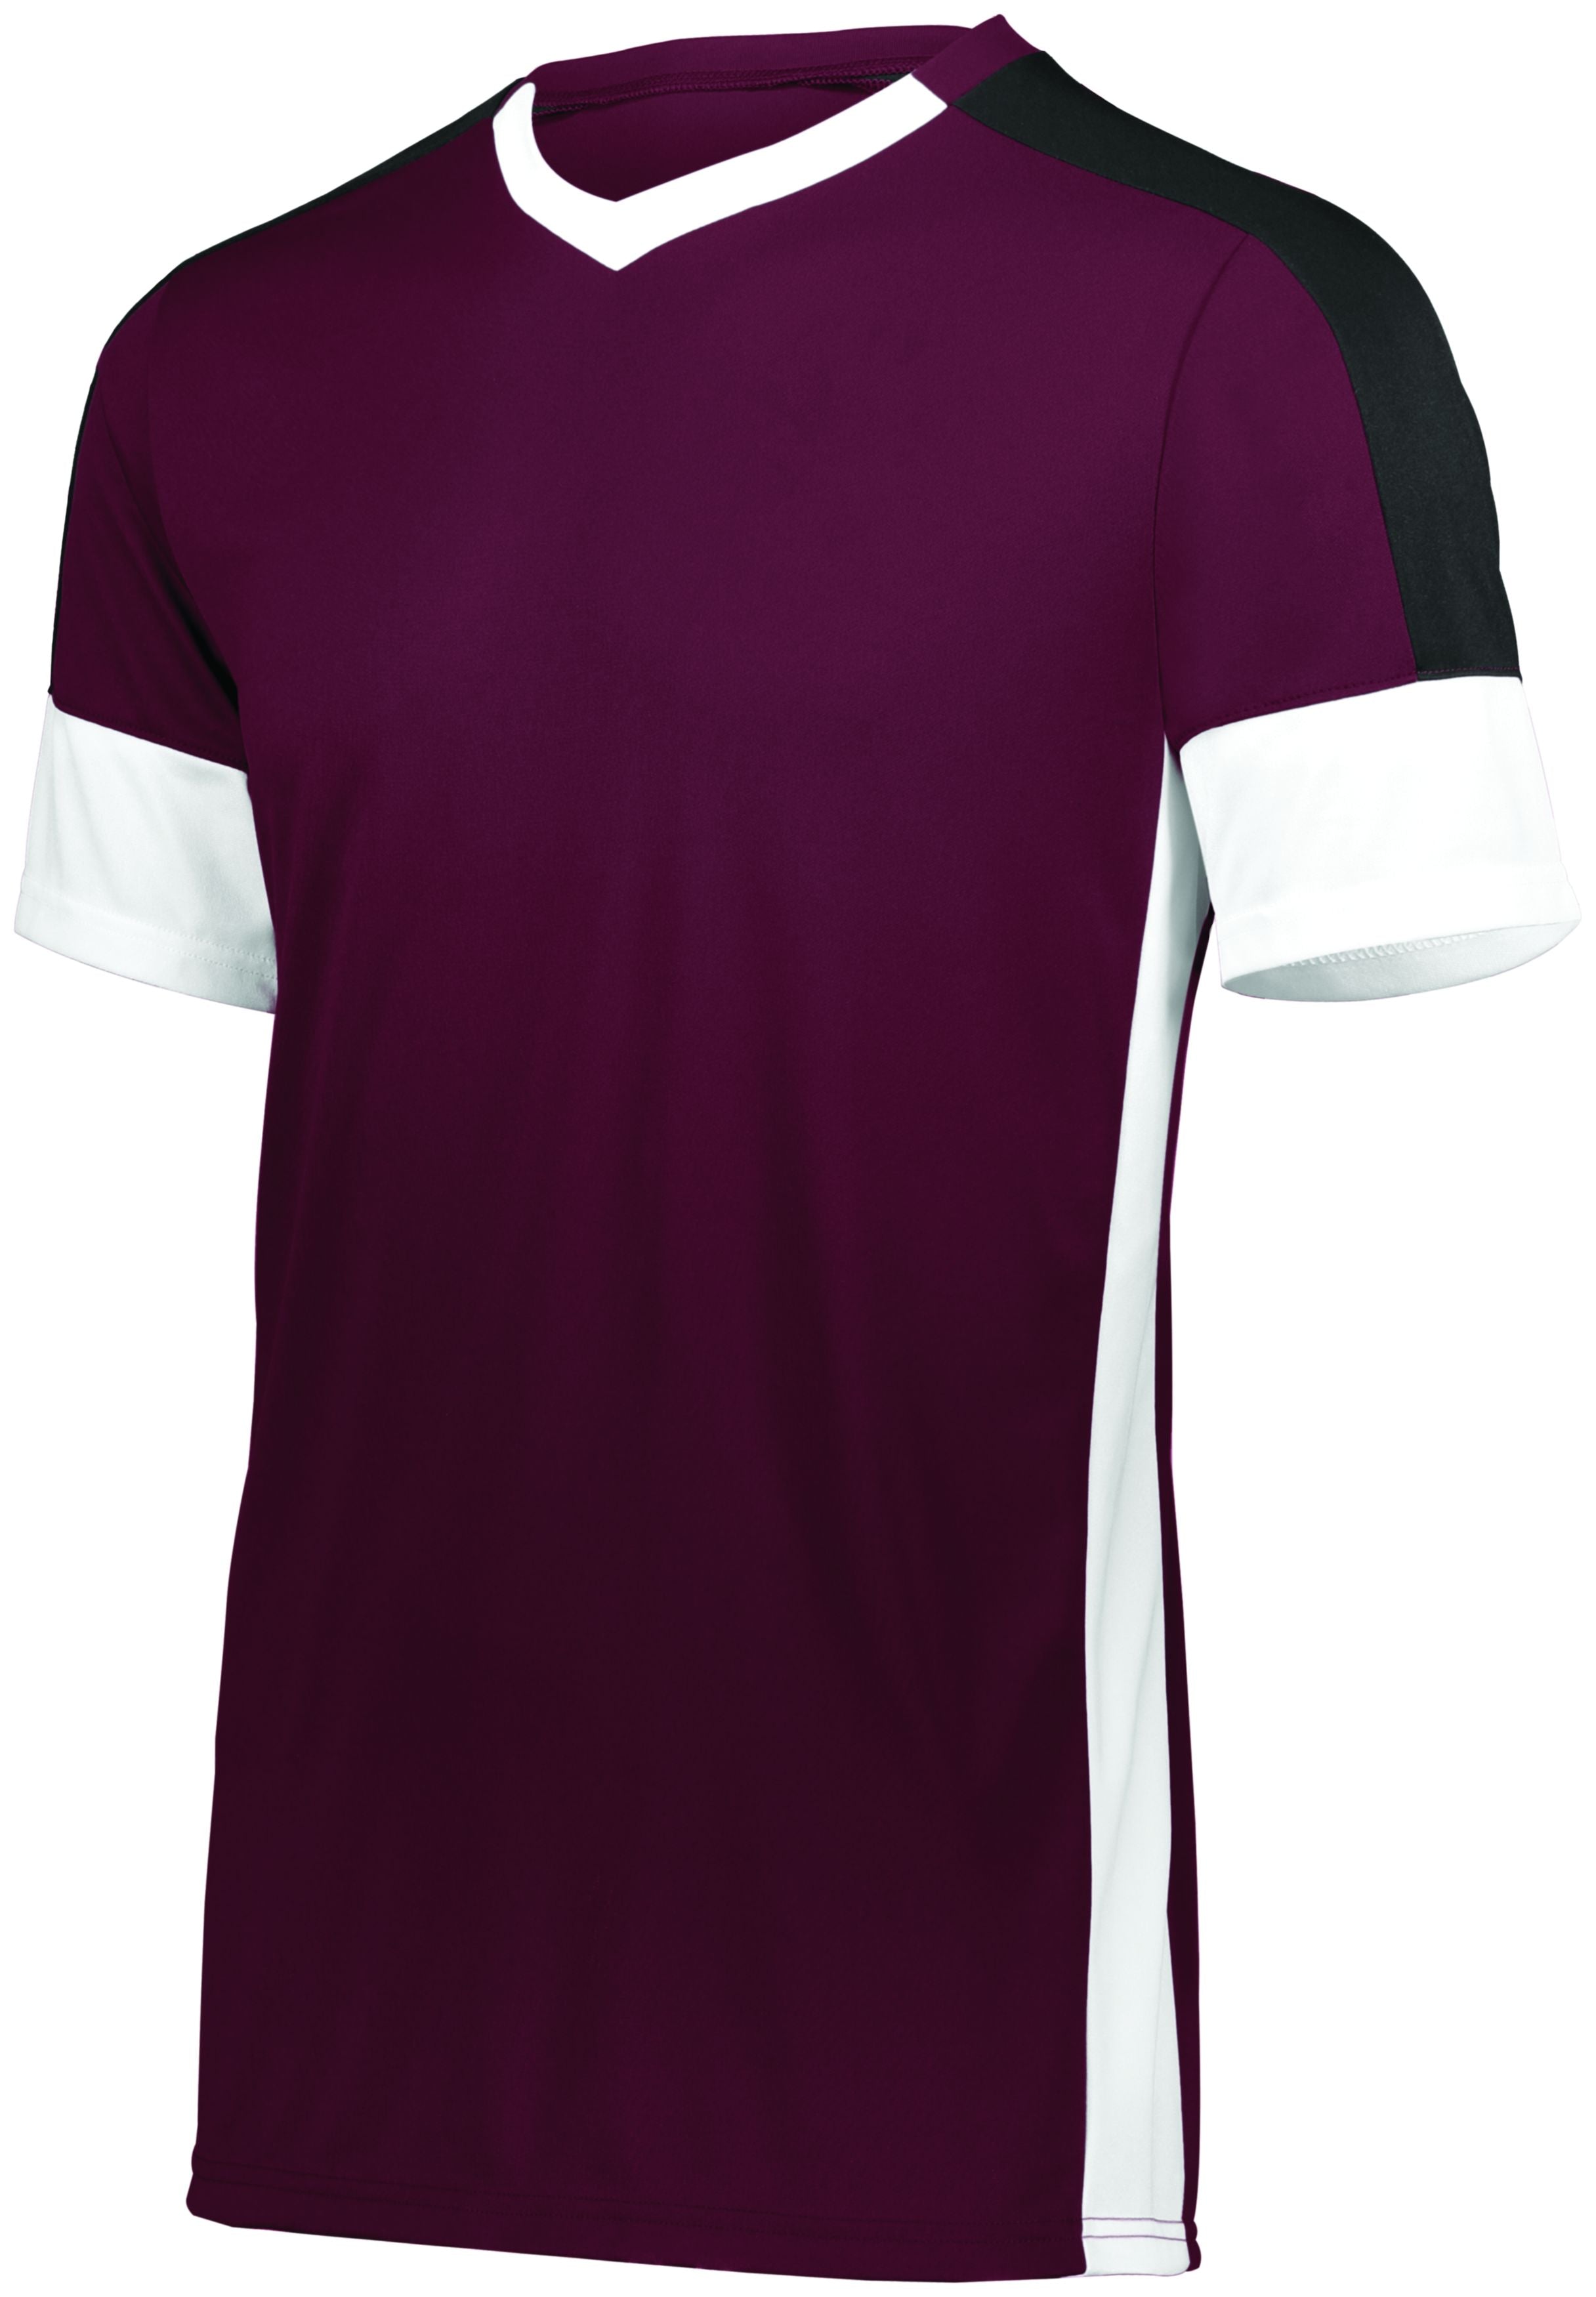 High 5 Youth Wembley Soccer Jersey in Maroon/White/Black  -Part of the Youth, Youth-Jersey, High5-Products, Soccer, Shirts, All-Sports-1 product lines at KanaleyCreations.com